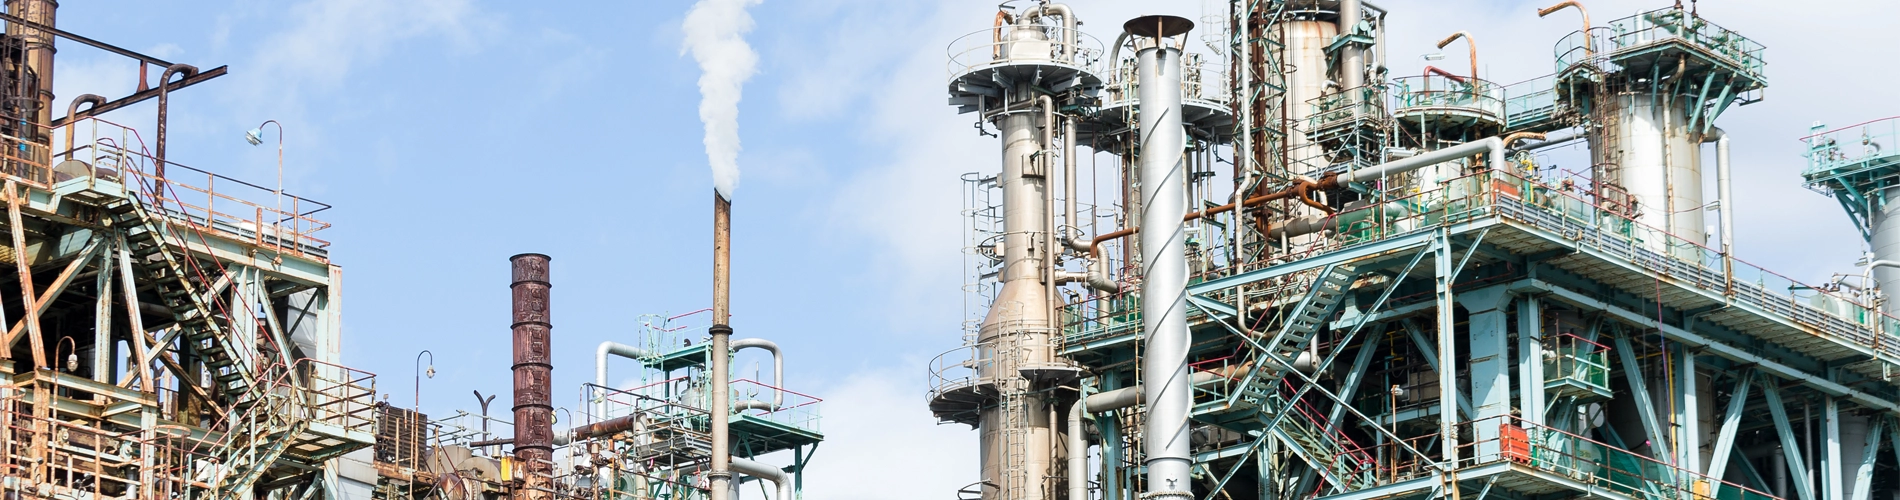 Why ERP is essential for Oil & Gas Companies?